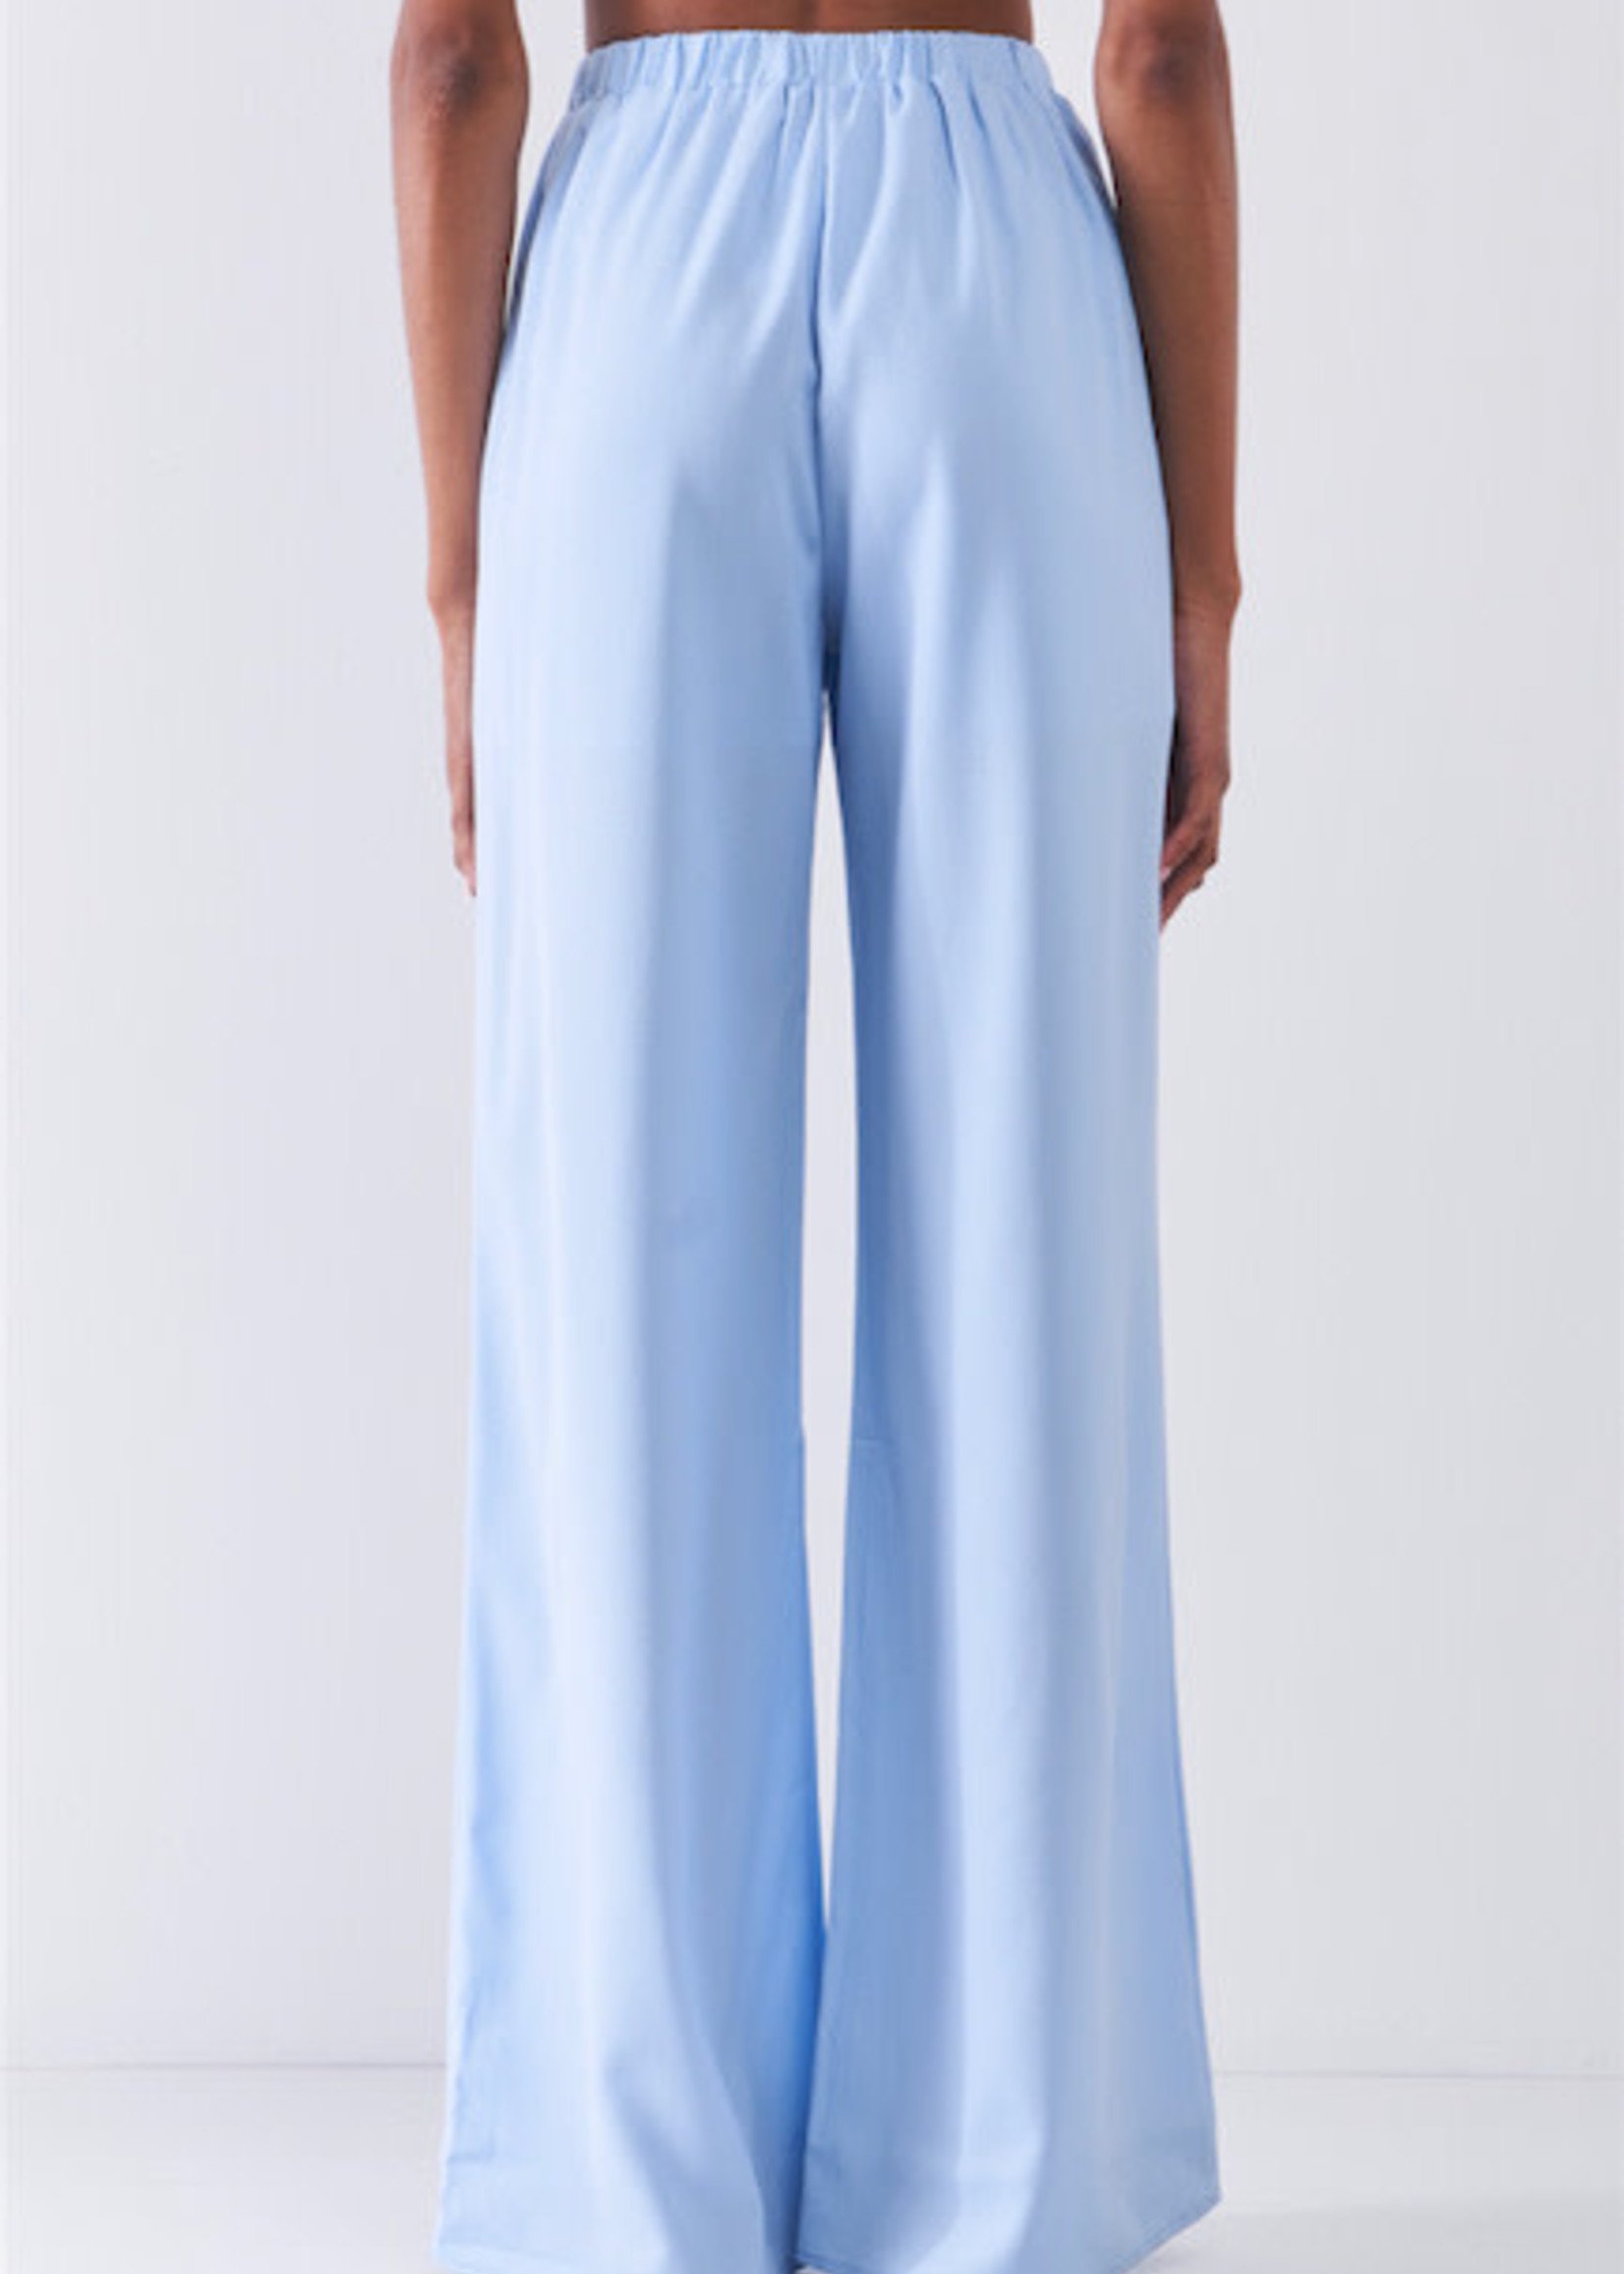 Baby Blue Pants Elastic Waist - Synesthesia Boutique